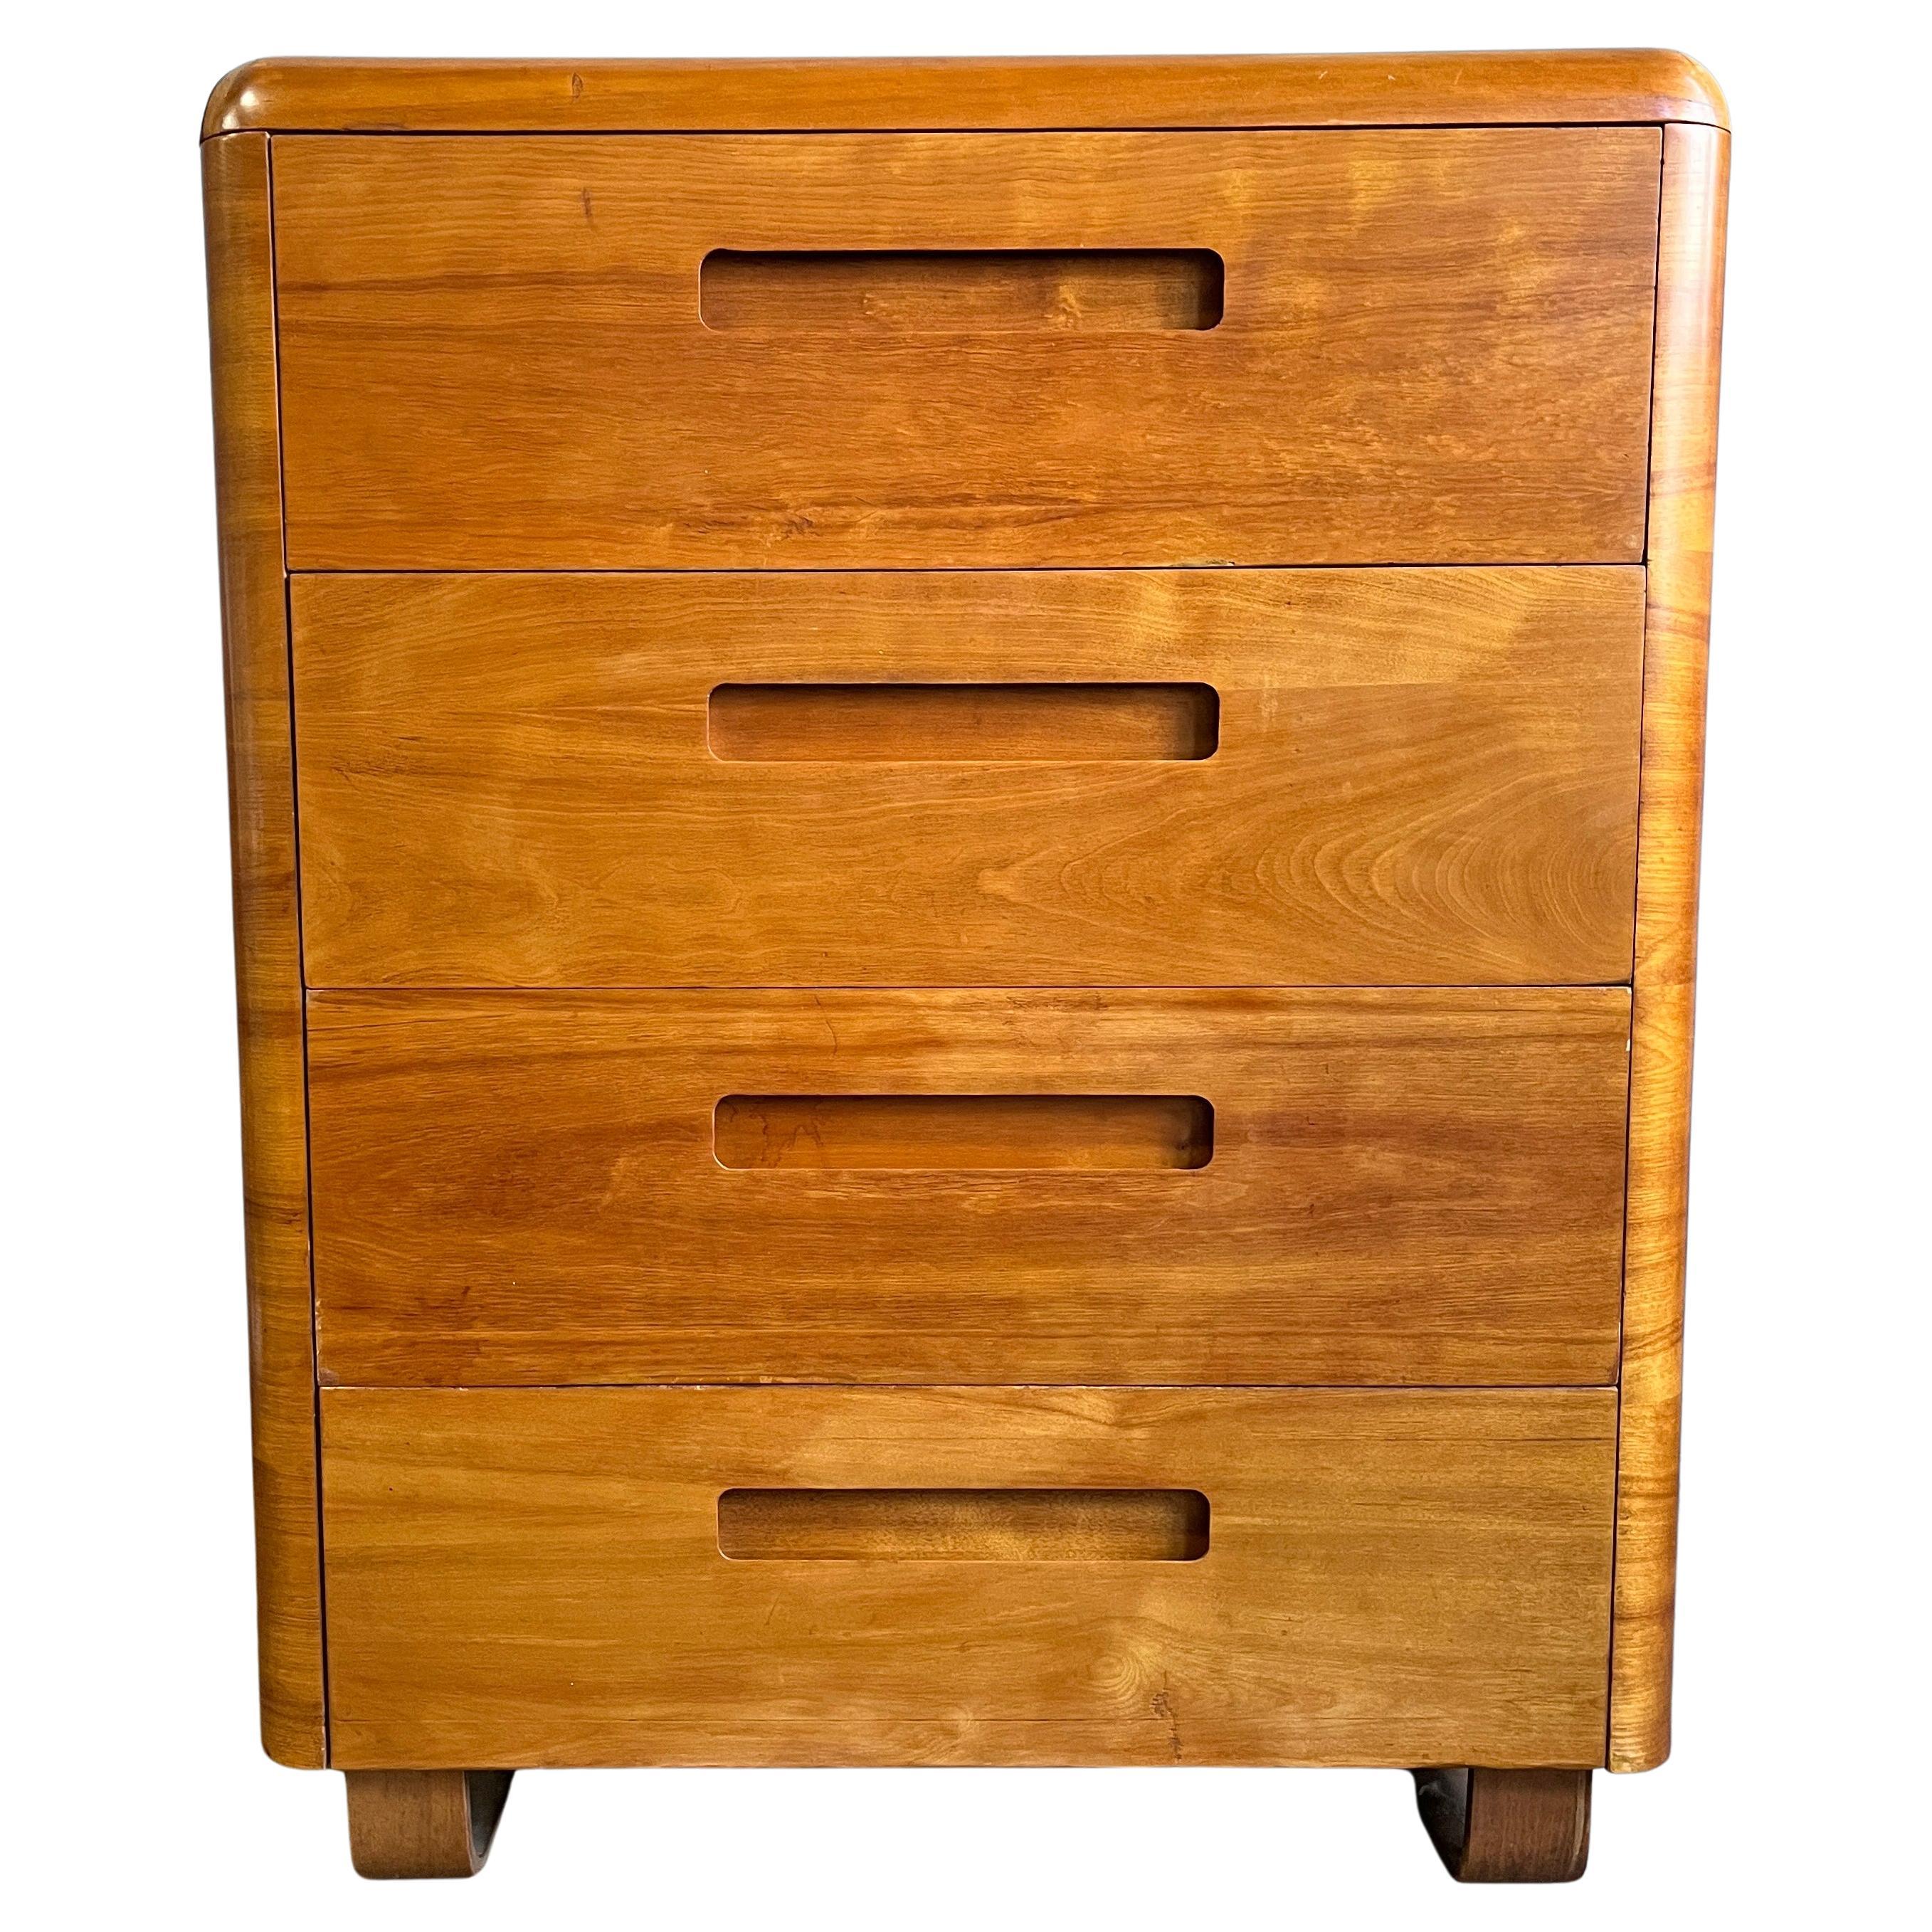 Superb Early Midcentury Chest of Drawers in Birchwood